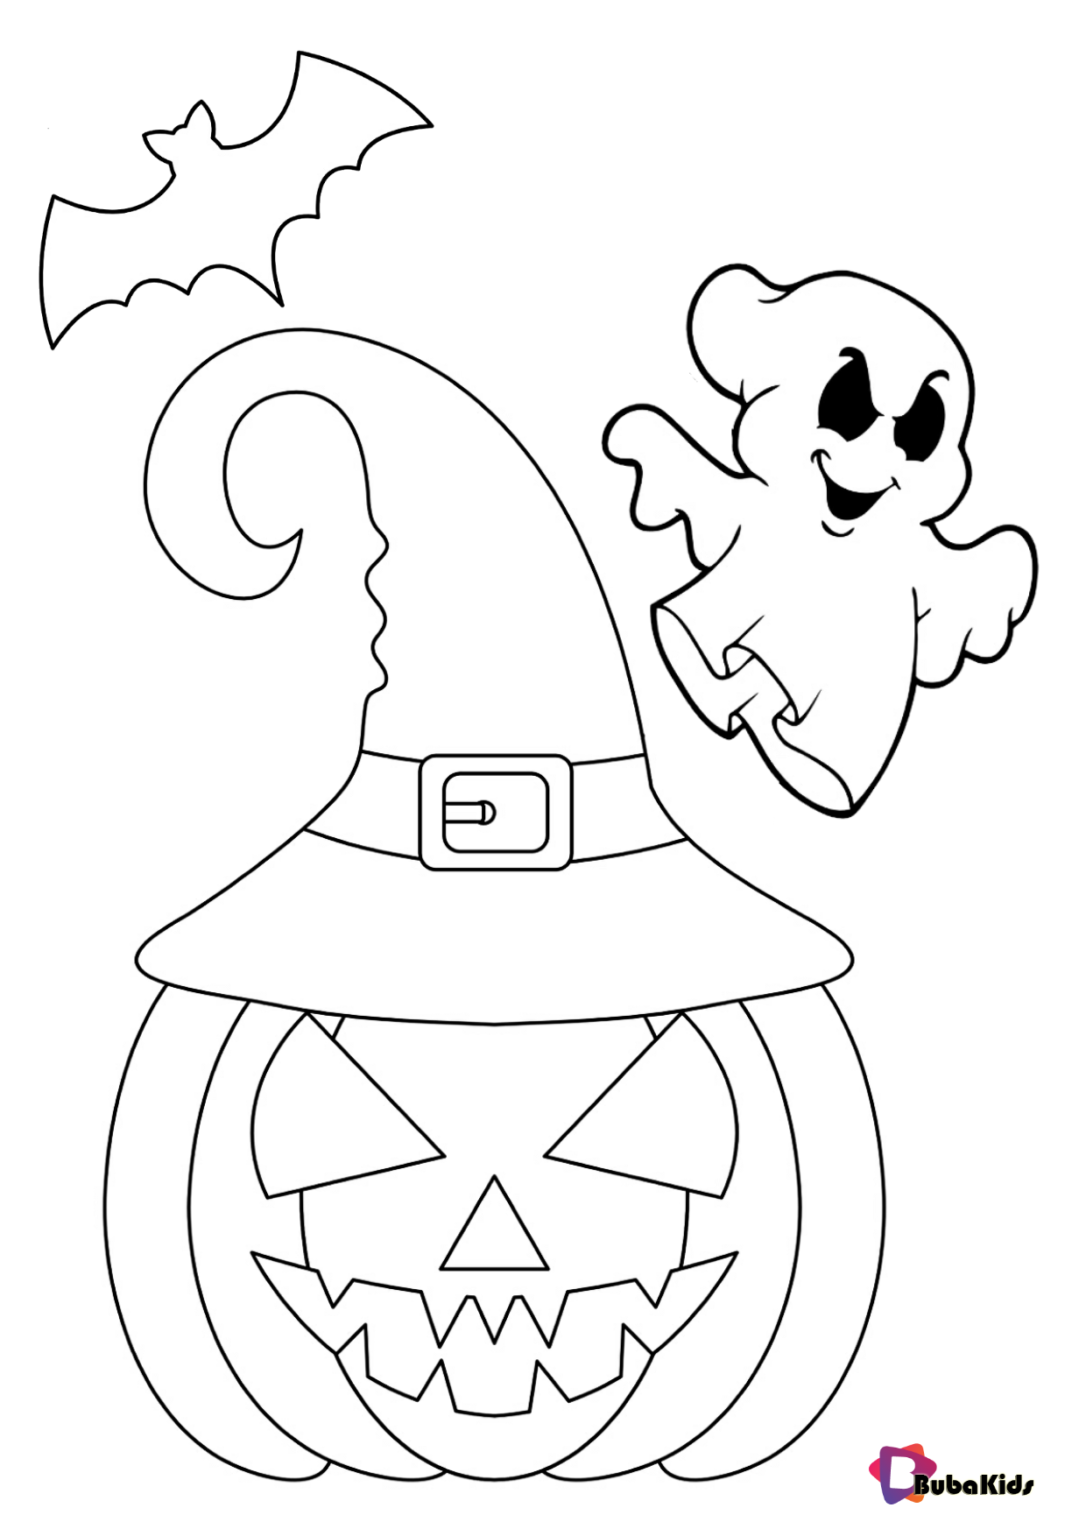 Halloween 2020 pumpkin ghost and bat coloring page | BubaKids.com